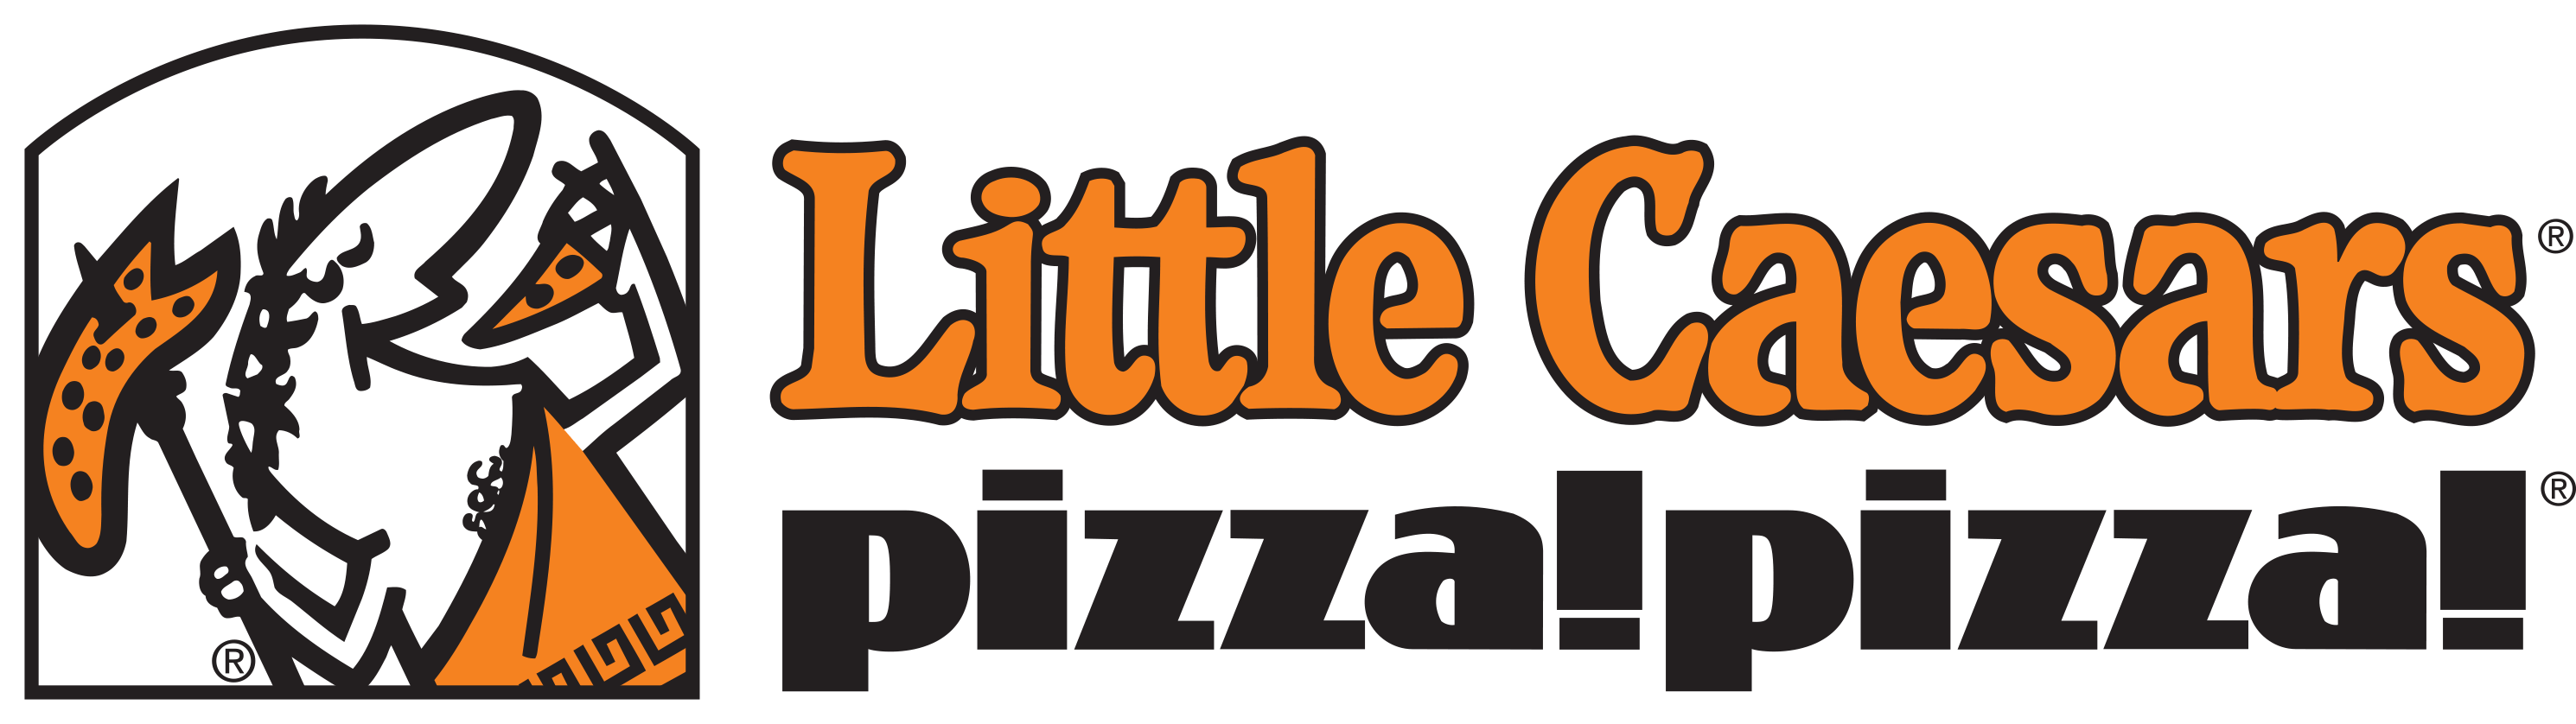 Little Ceasars Logo - 7 Lessons Radio Can Learn from Little Caesars Founder Mike Ilitch